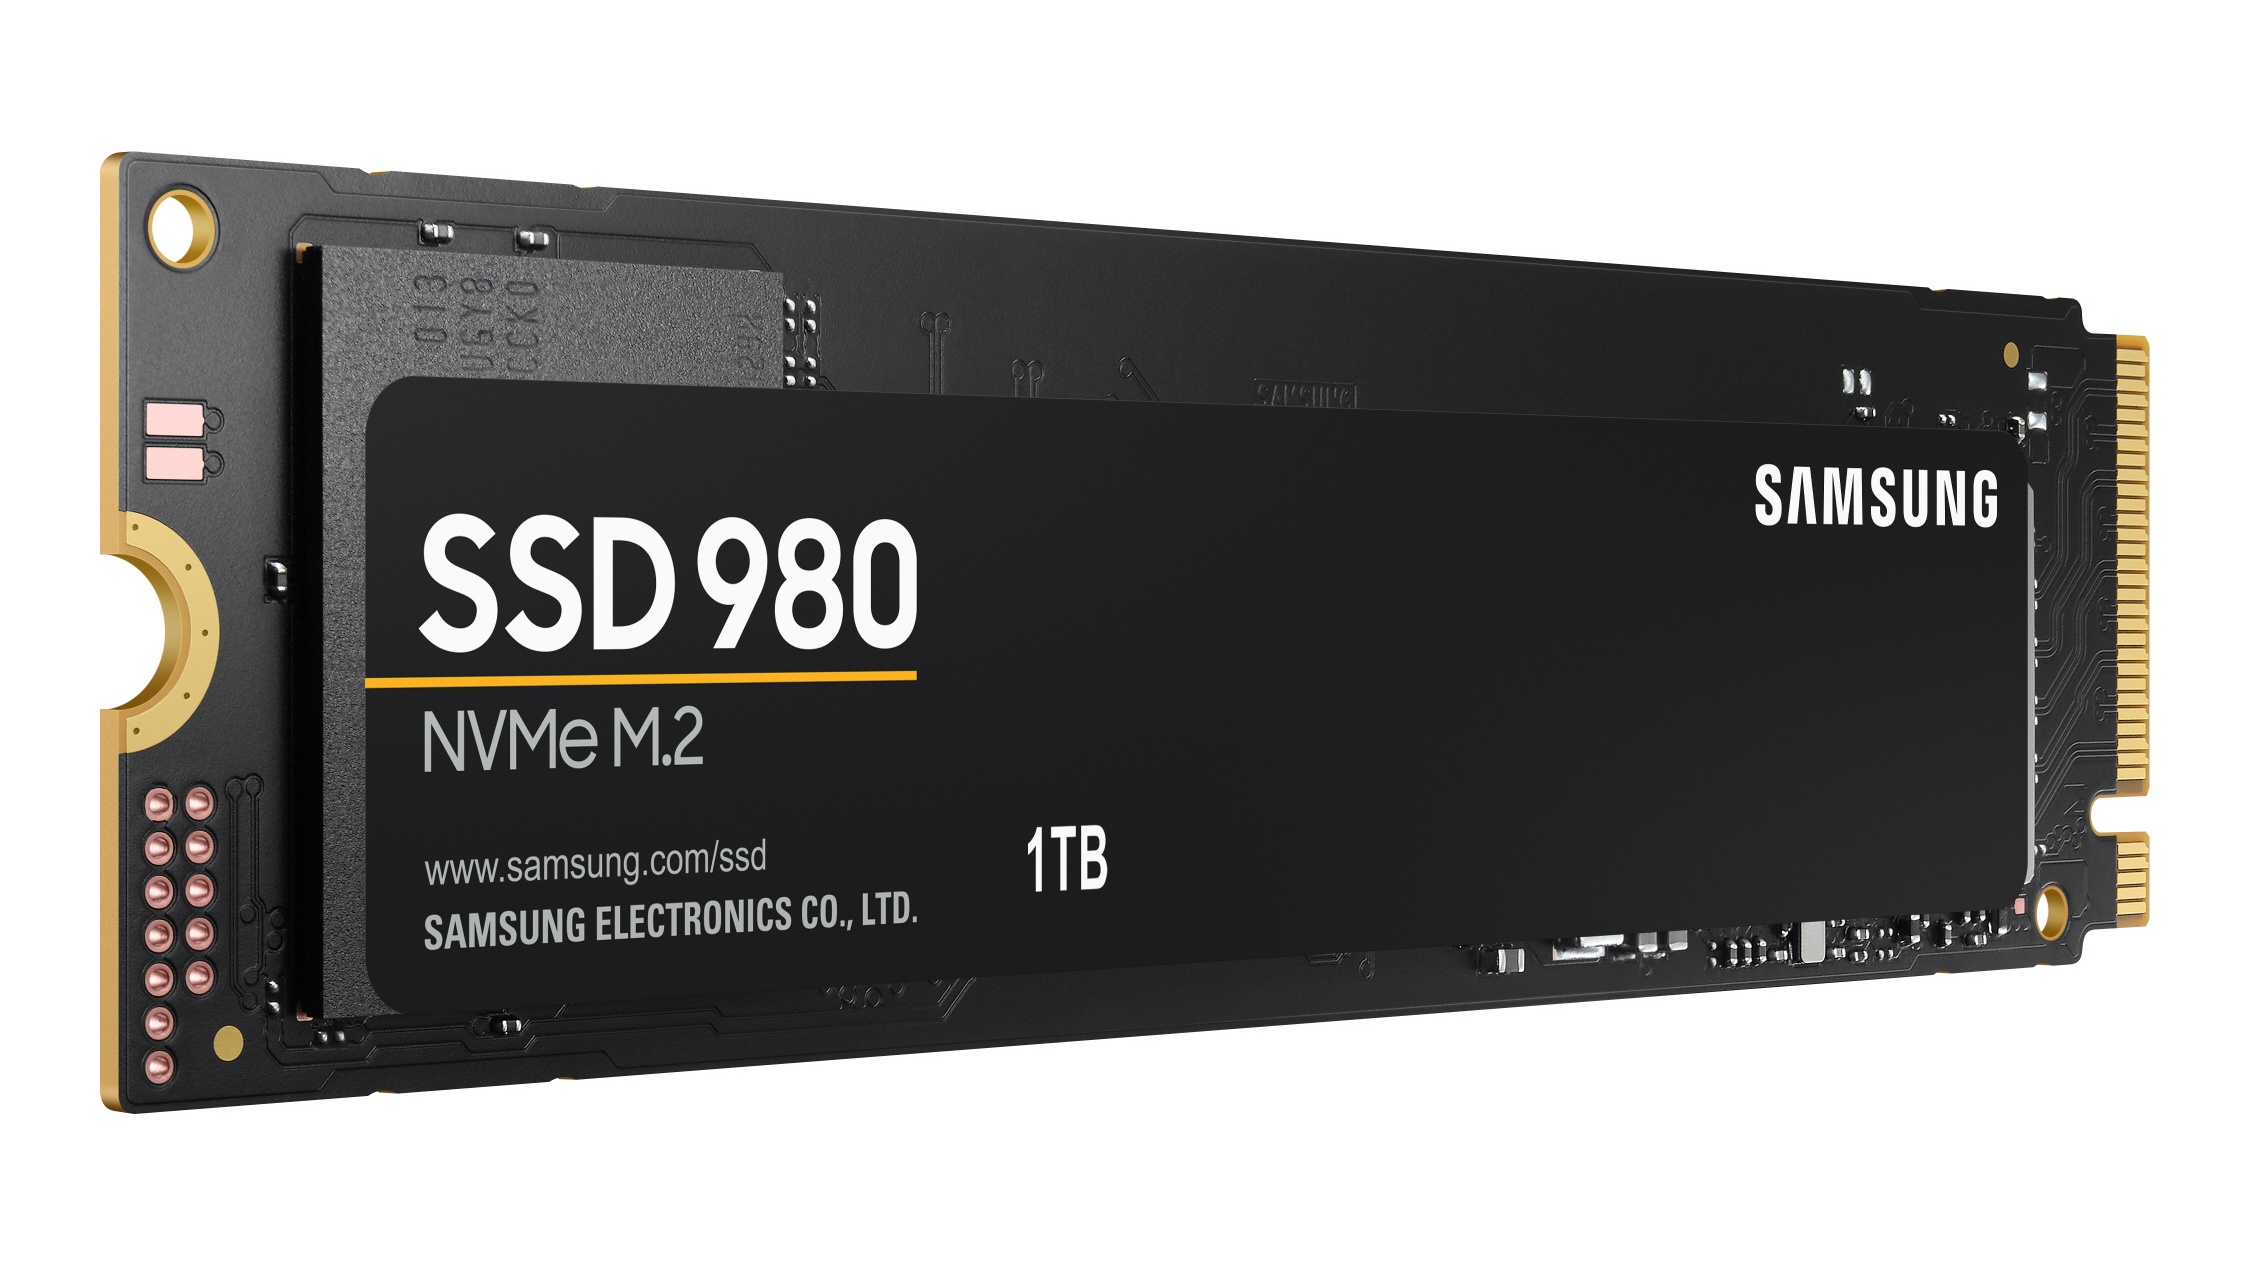 Samsung releases first DRAM-less consumer SSD – It’s 980 NVMe SSD